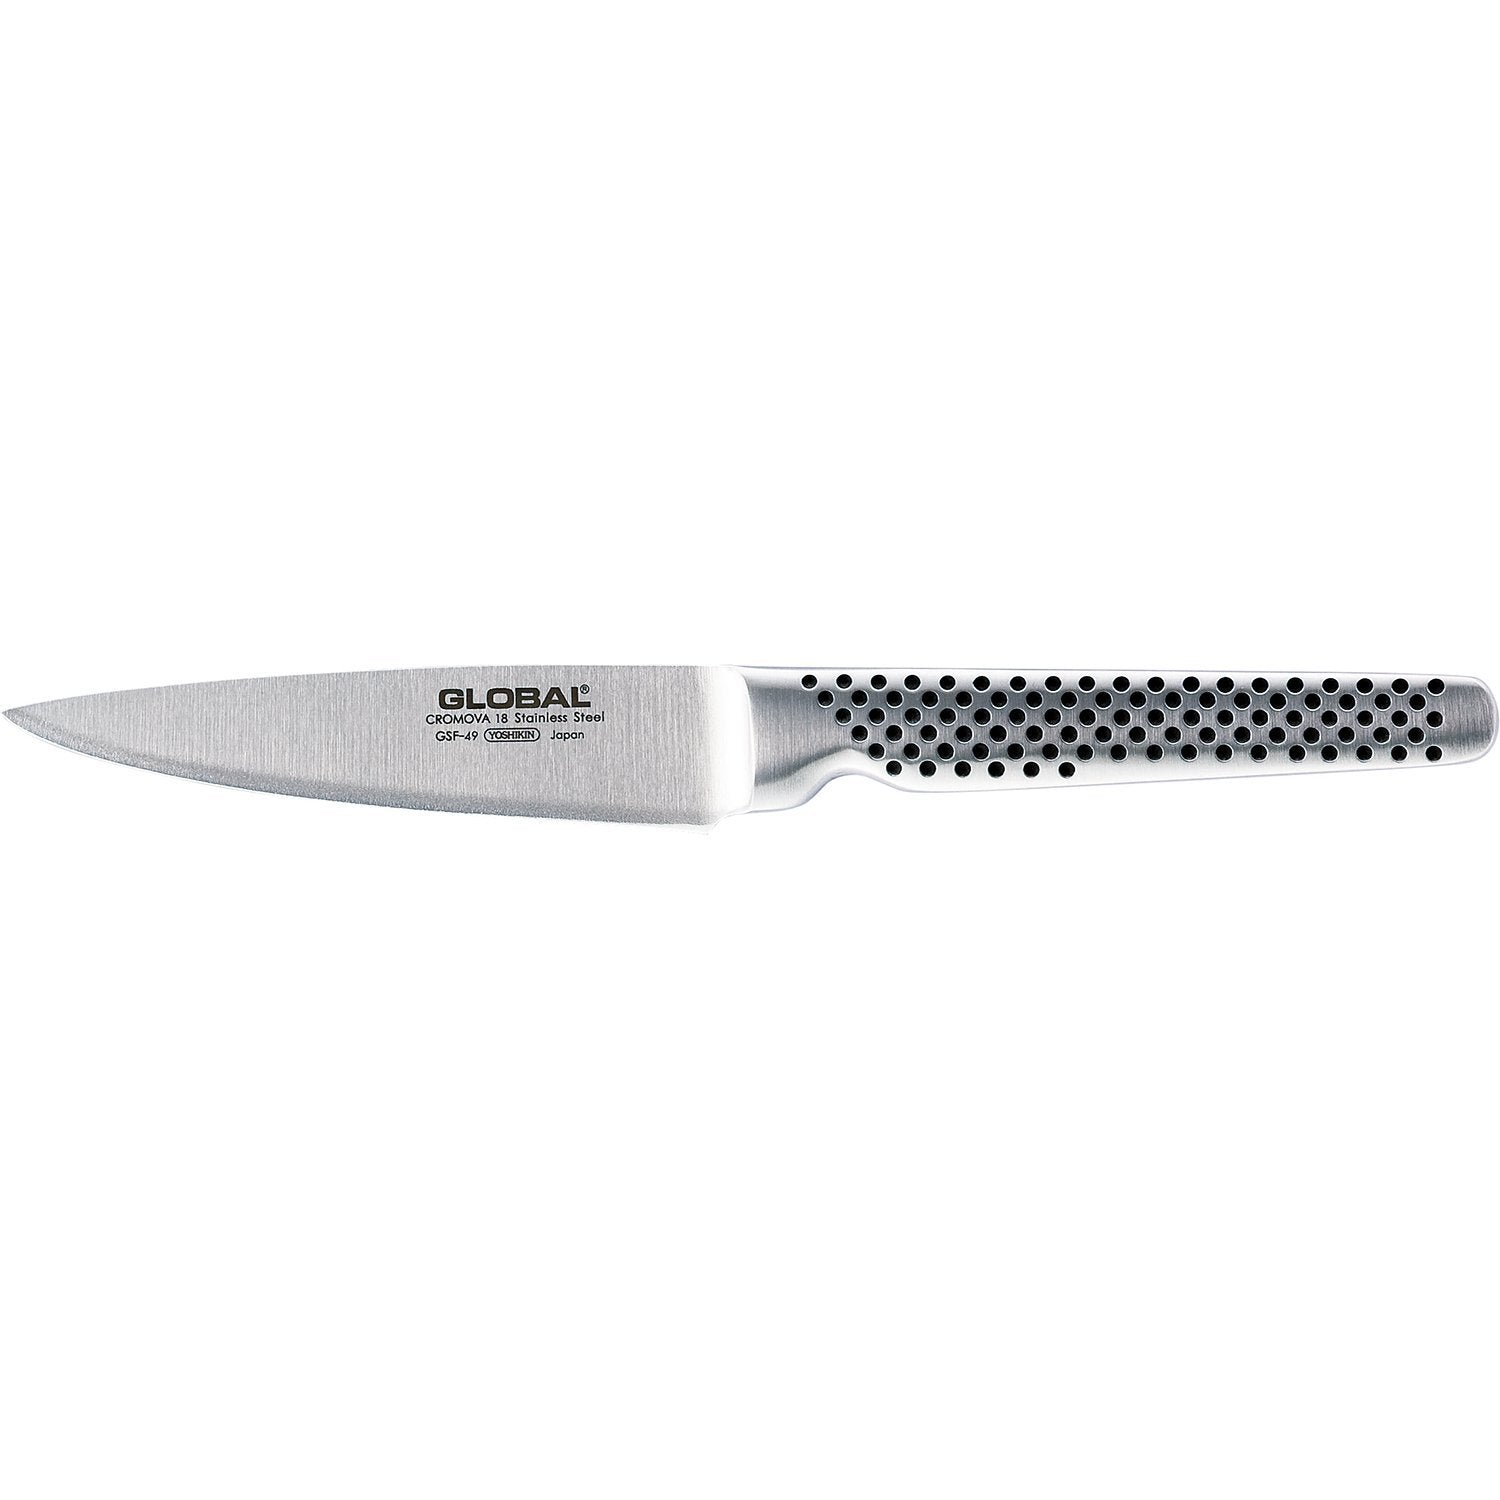 Global Couteau universel GSF 49, 11 cm